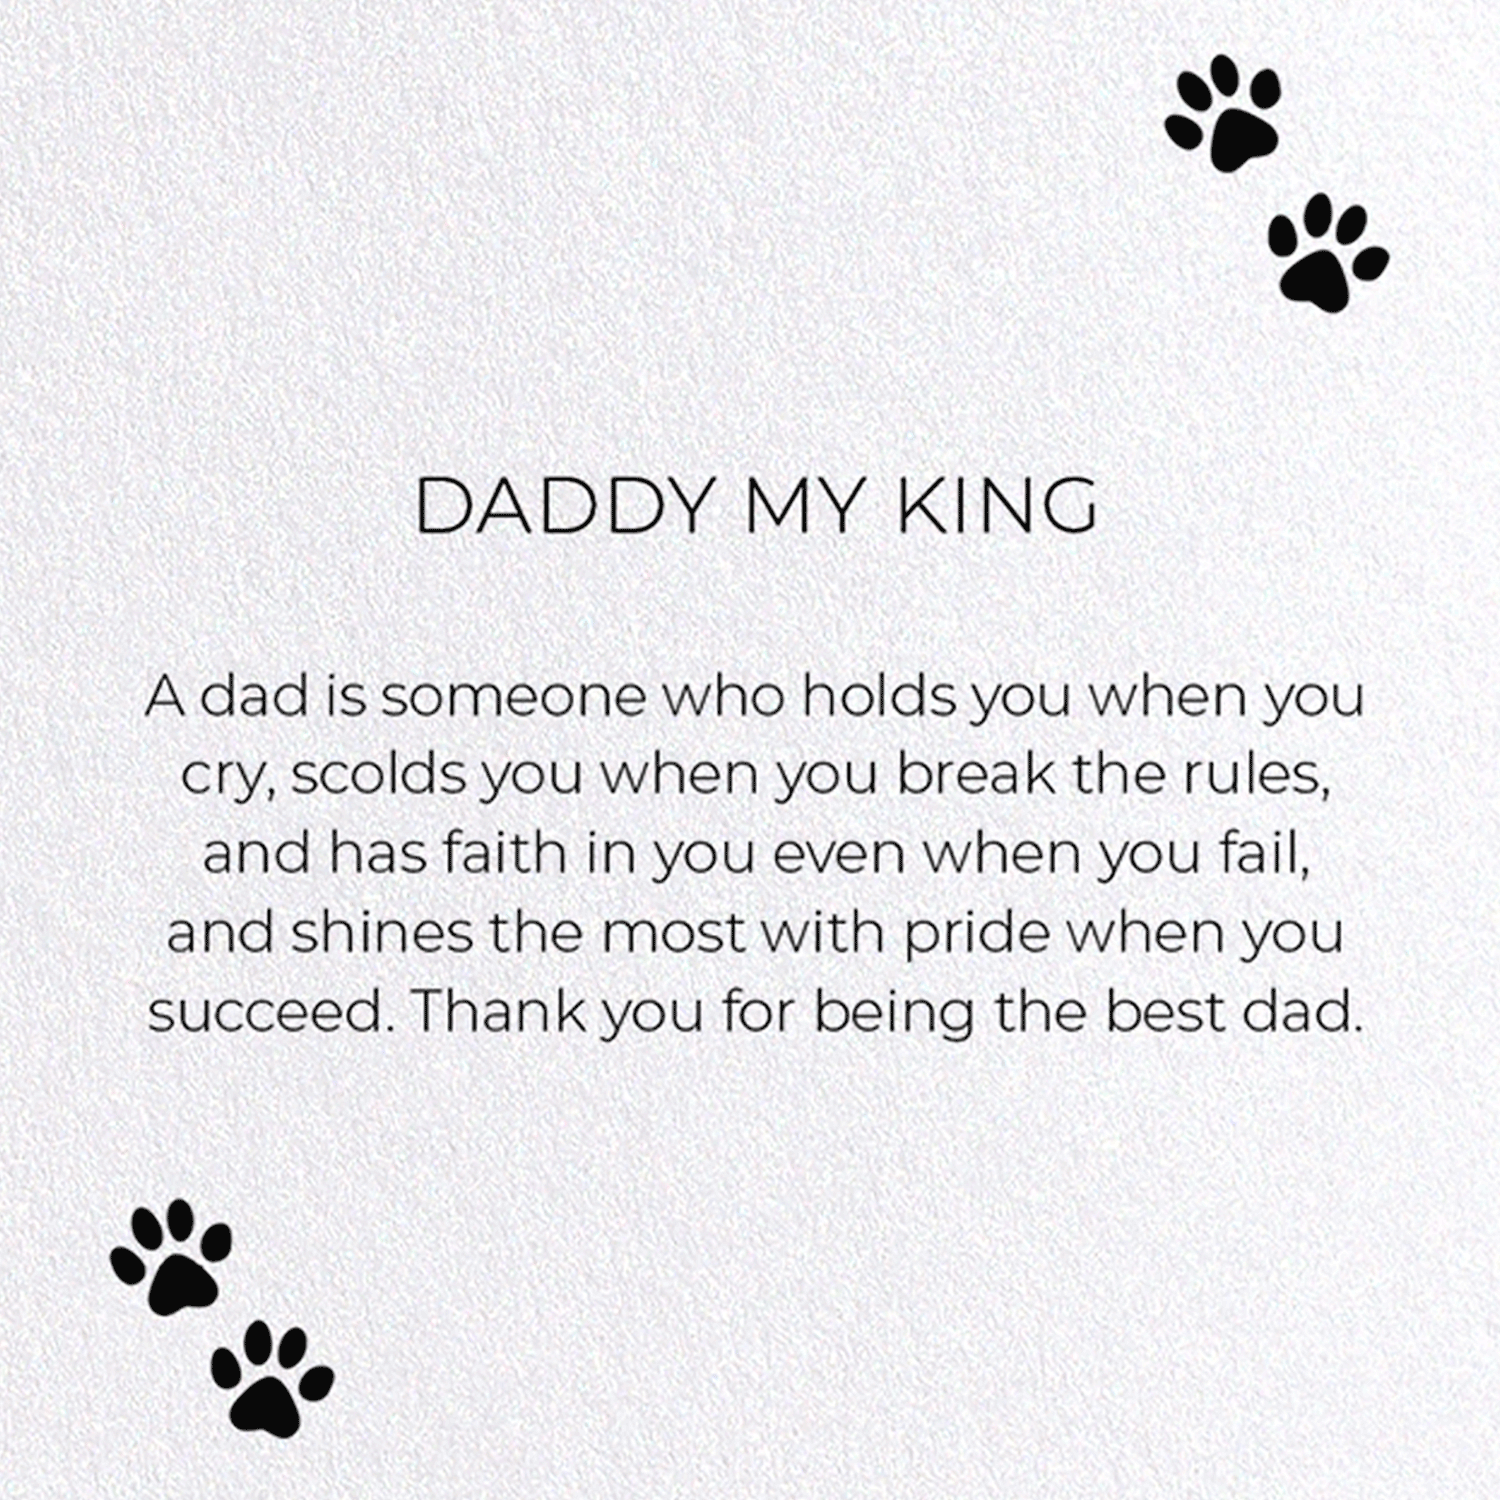 DADDY MY KING